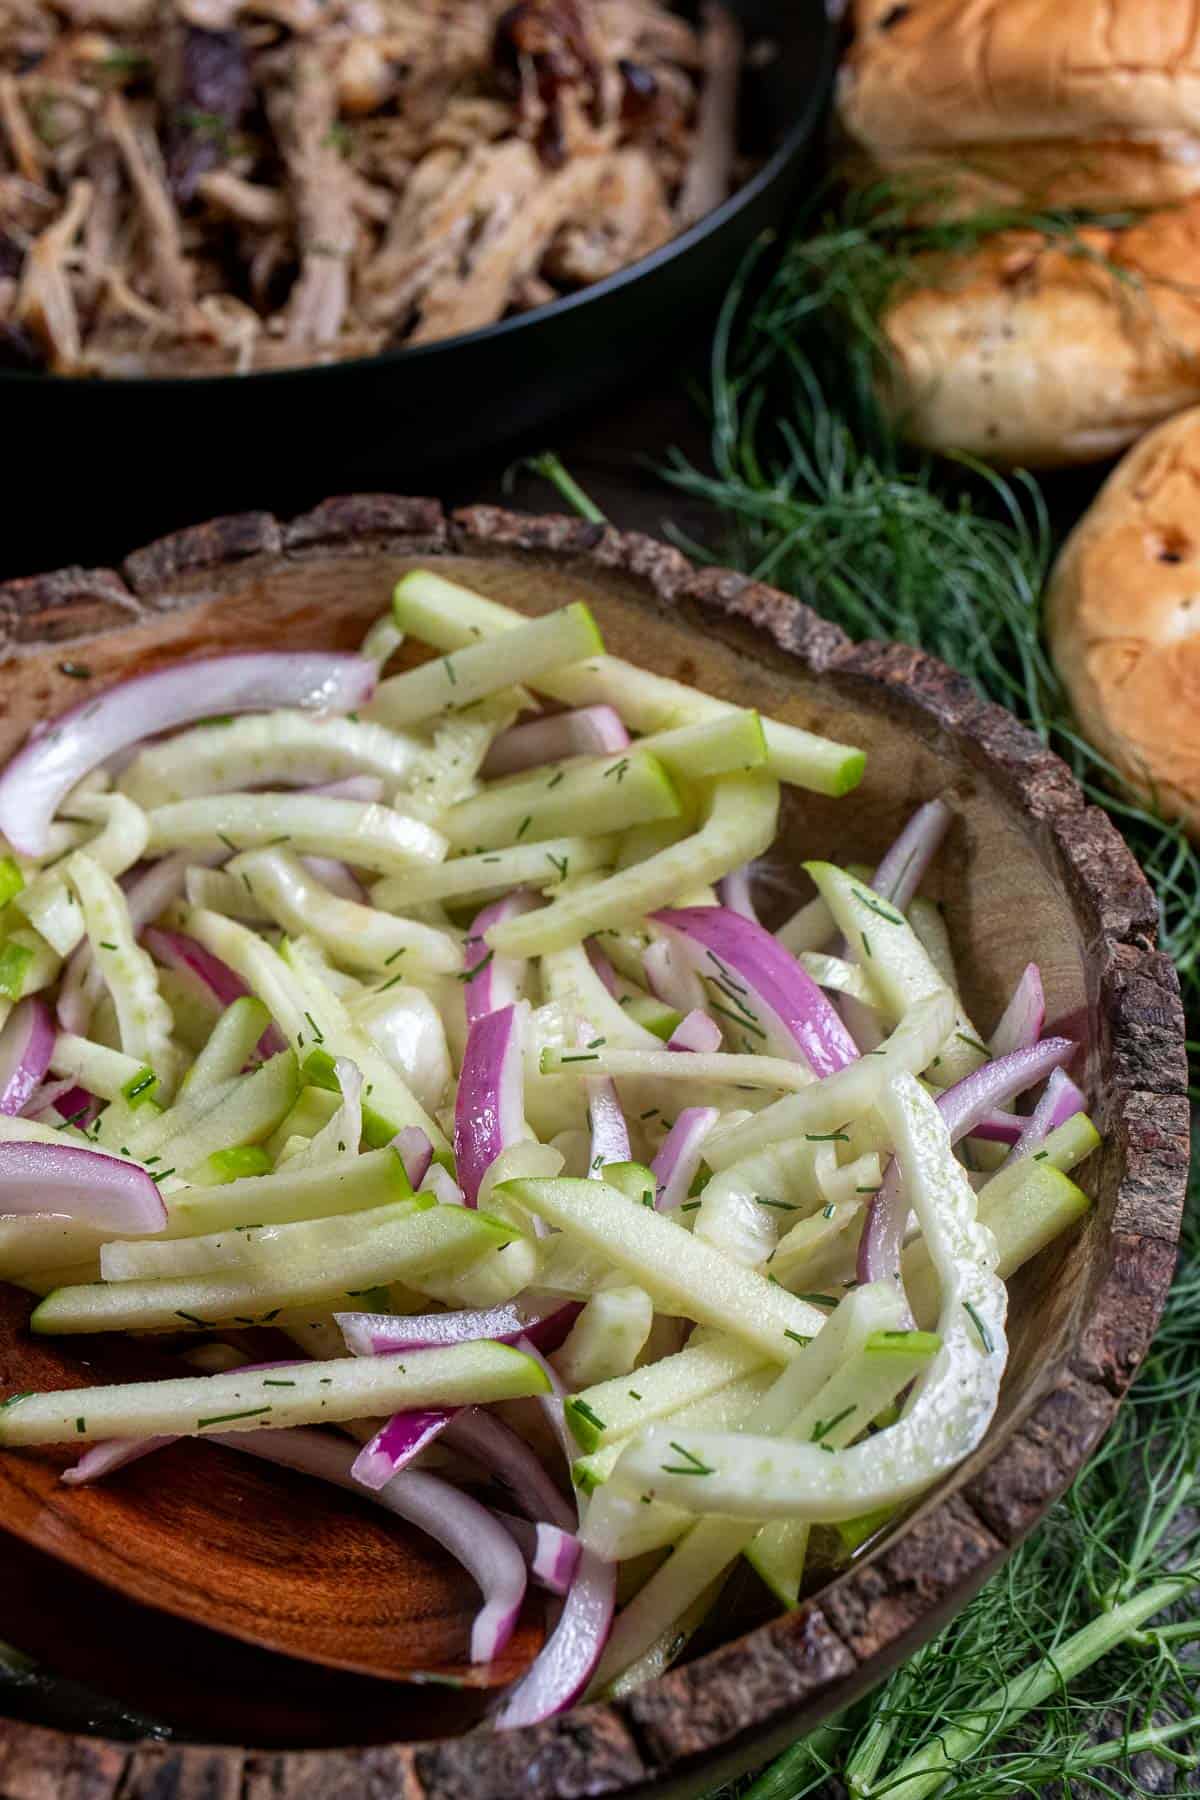 Fennel and apple slaw in a wooden bowl with a plate of cider pulled pork behind it.